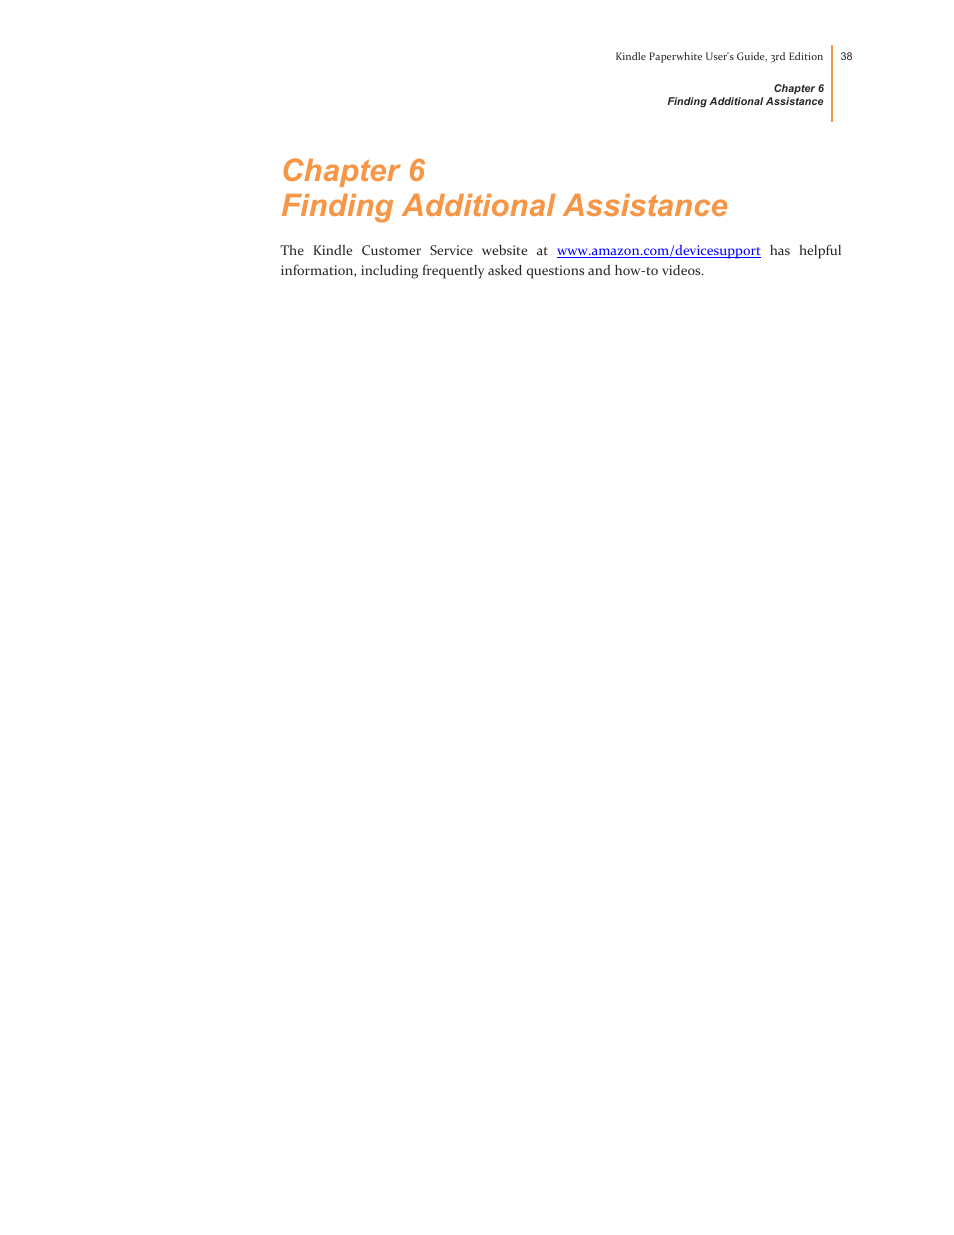 Chapter 6 finding additional assistance | Kindle Paperwhite (2nd Generation) User Manual | Page 38 / 47